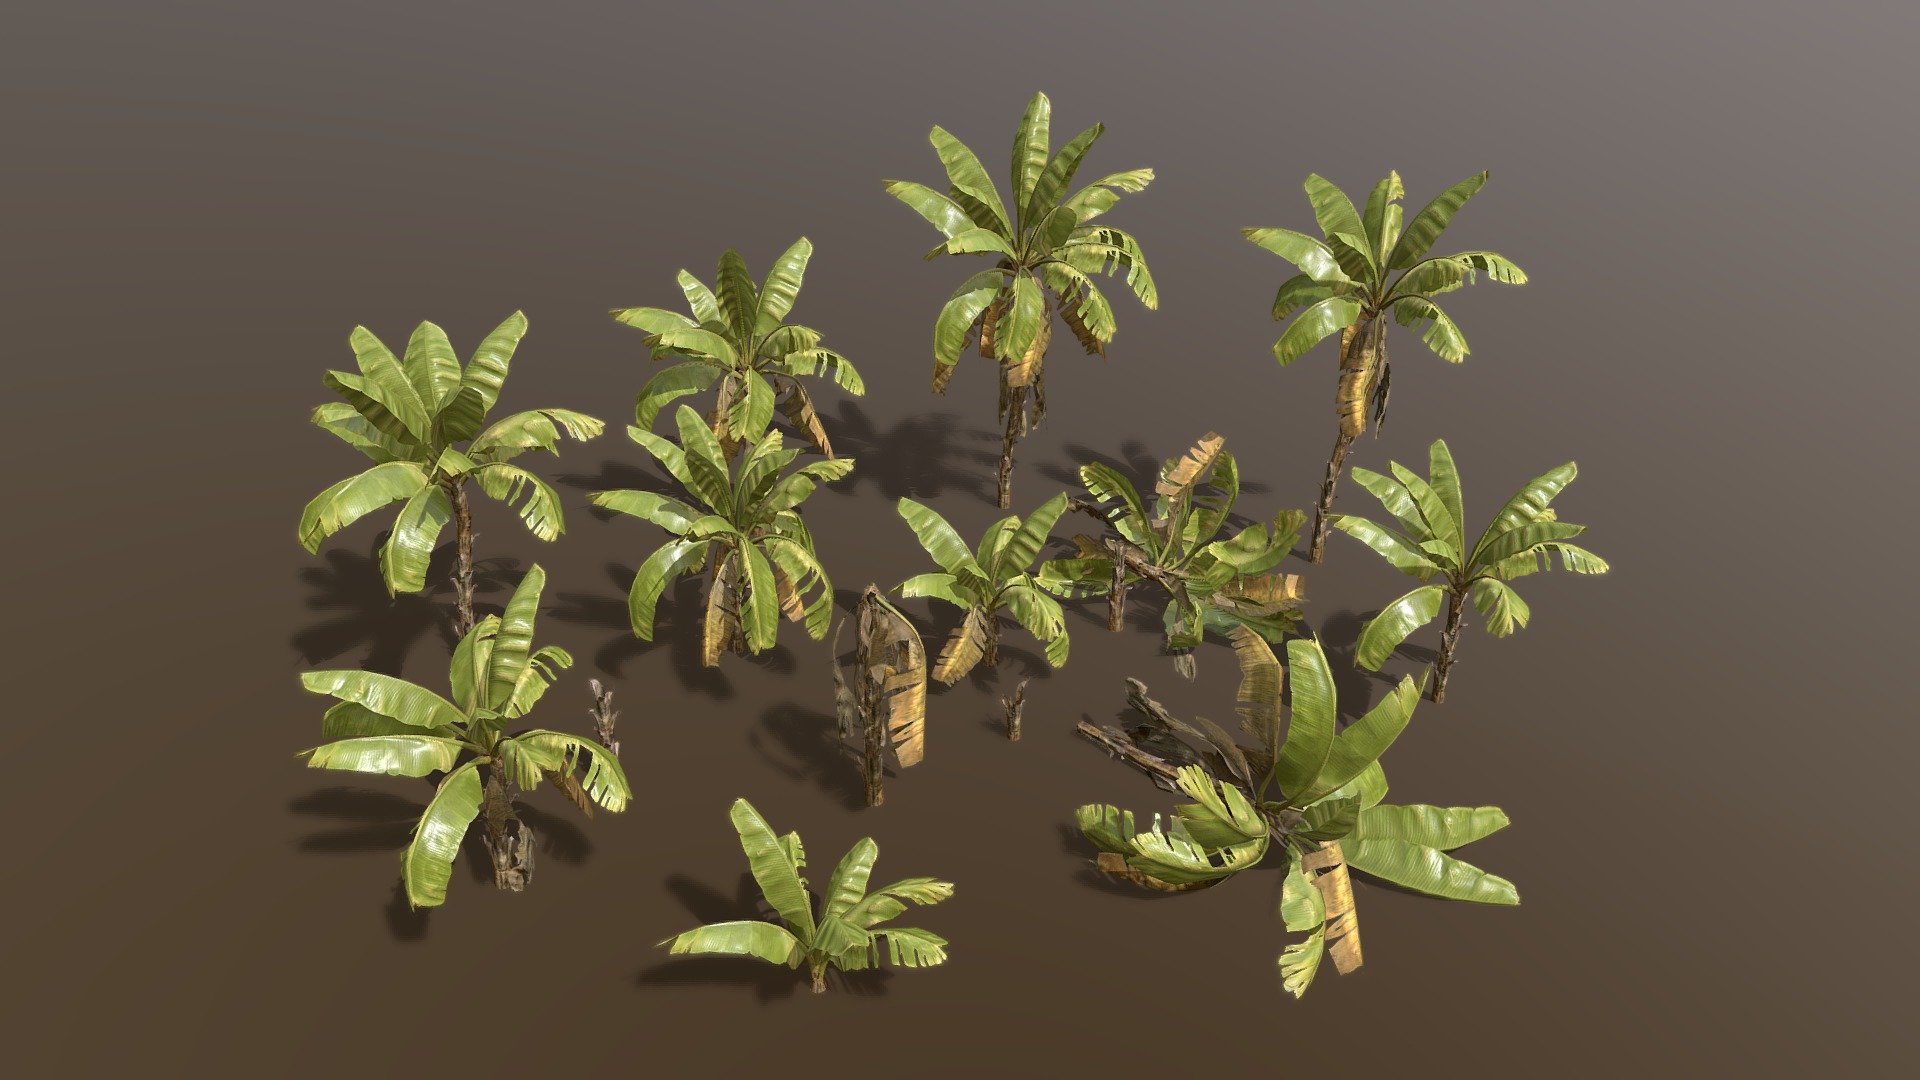 Banana Plant Pack created in tree it.

Please check out my free models on my sketchfab profile made in tree it for compatibility.

Includes 14 diffrent models.

Each modle has the main model + 5 levels of detail, last LOD is an 8 poly imposter/billboard.

Exported to .fbx .obj .dbo

fbx/dbo format includes vertex colors for vertex shader wind animation.

Includes the tree it .tre project.

Texture size is 2k x 2.

Why am I selling this model?. Im the createor of treeit, a free tree generator that these tree models are created in. Having tree packs for sale will incentivise and insure further development of the program that is in need of improvement 3d model